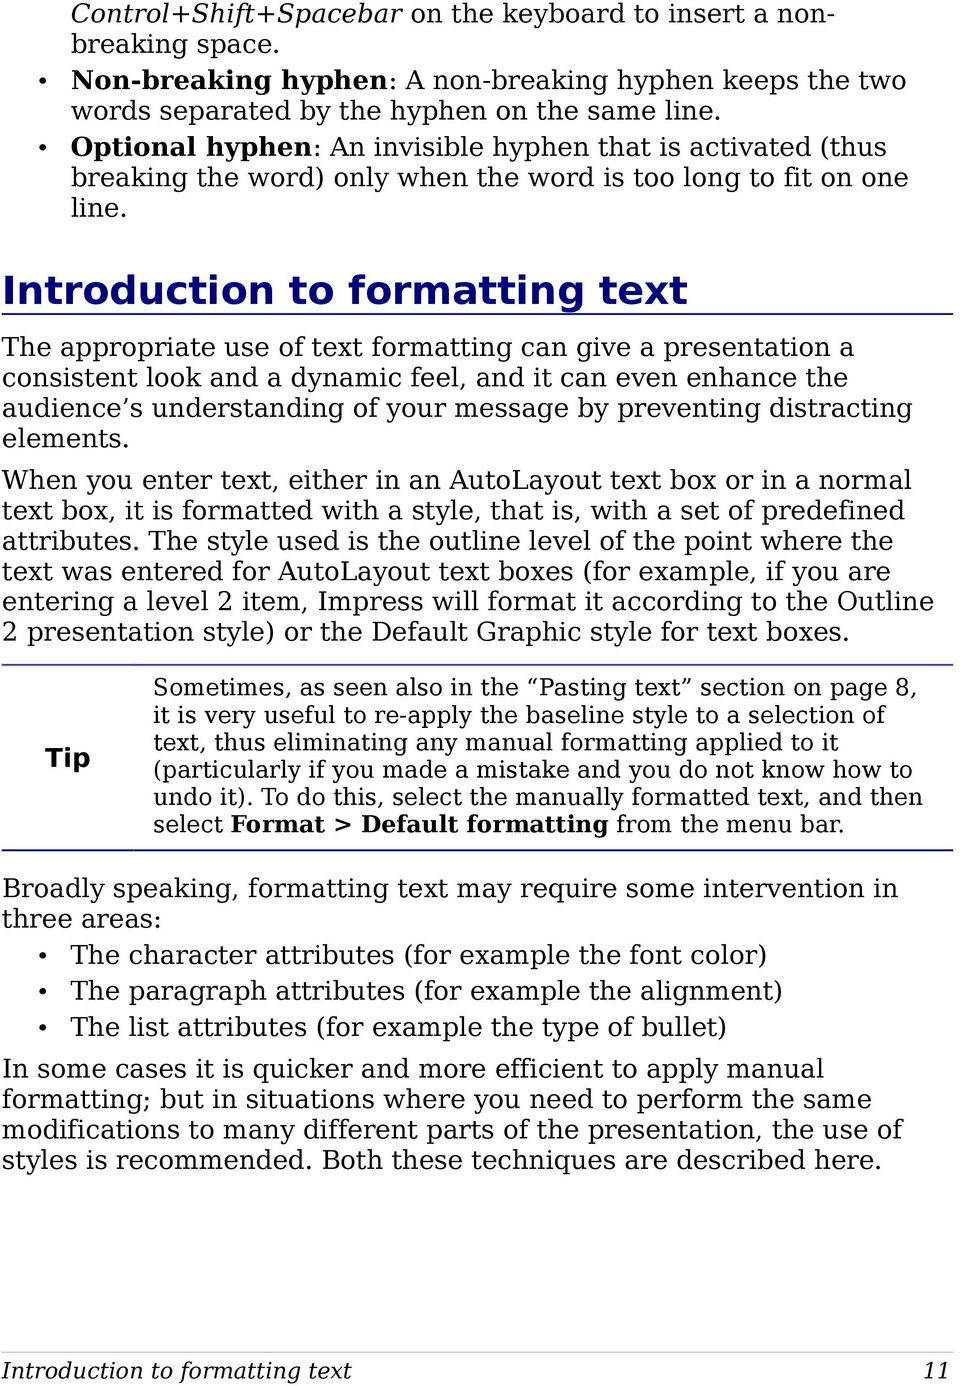 Introduction to formatting text The appropriate use of text formatting can give a presentation a consistent look and a dynamic feel, and it can even enhance the audience s understanding of your